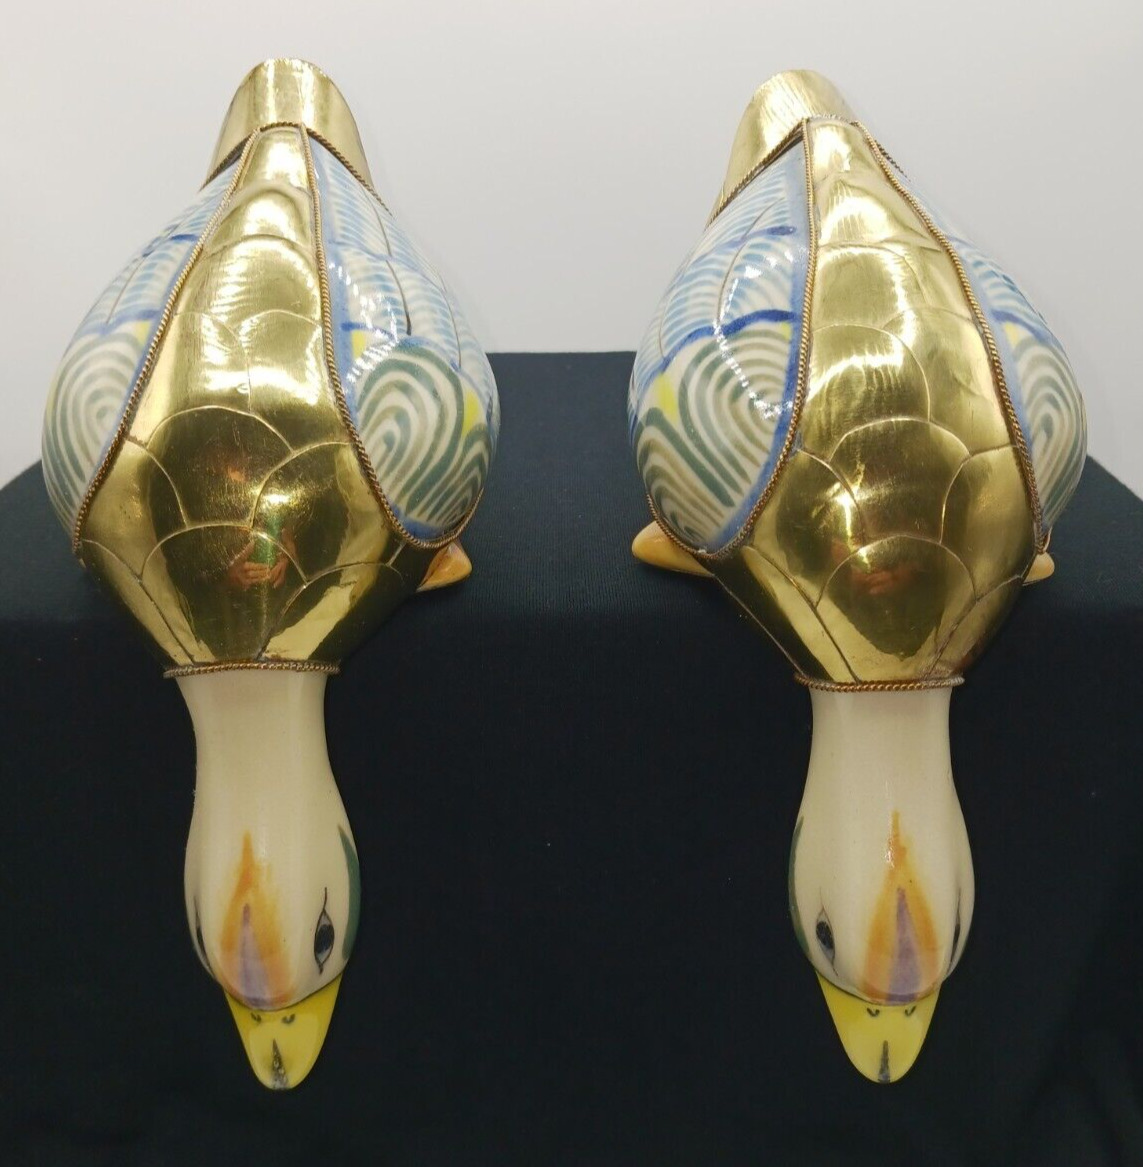 Vtg Tonala Mexico Pottery Duck Armored Brass Scales Shelf Sitter Set of 2